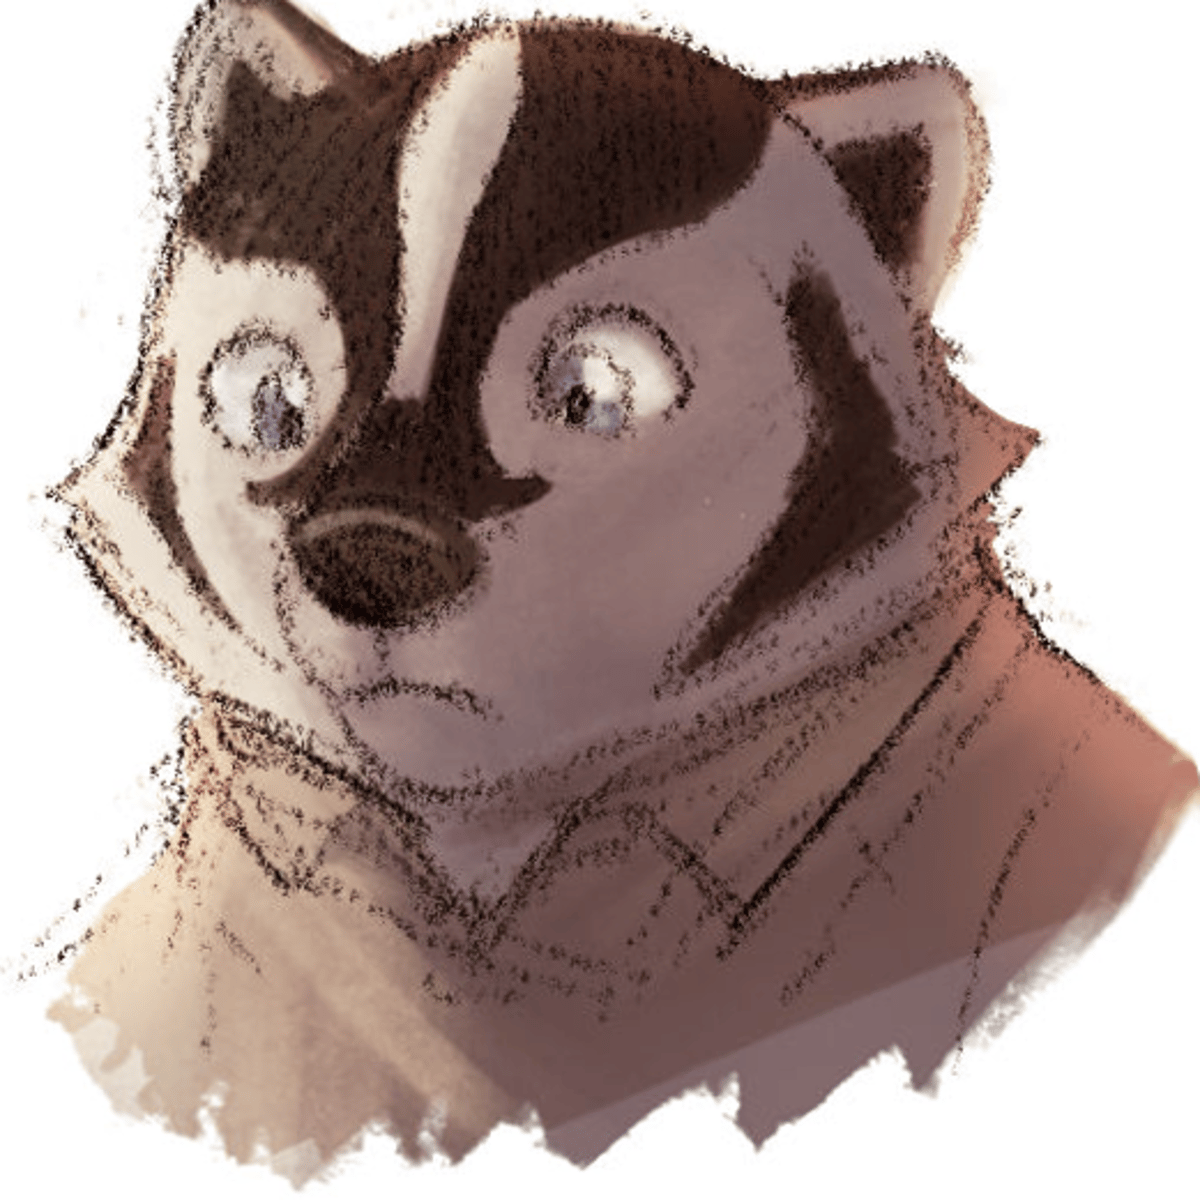 badger dad (Roswell)